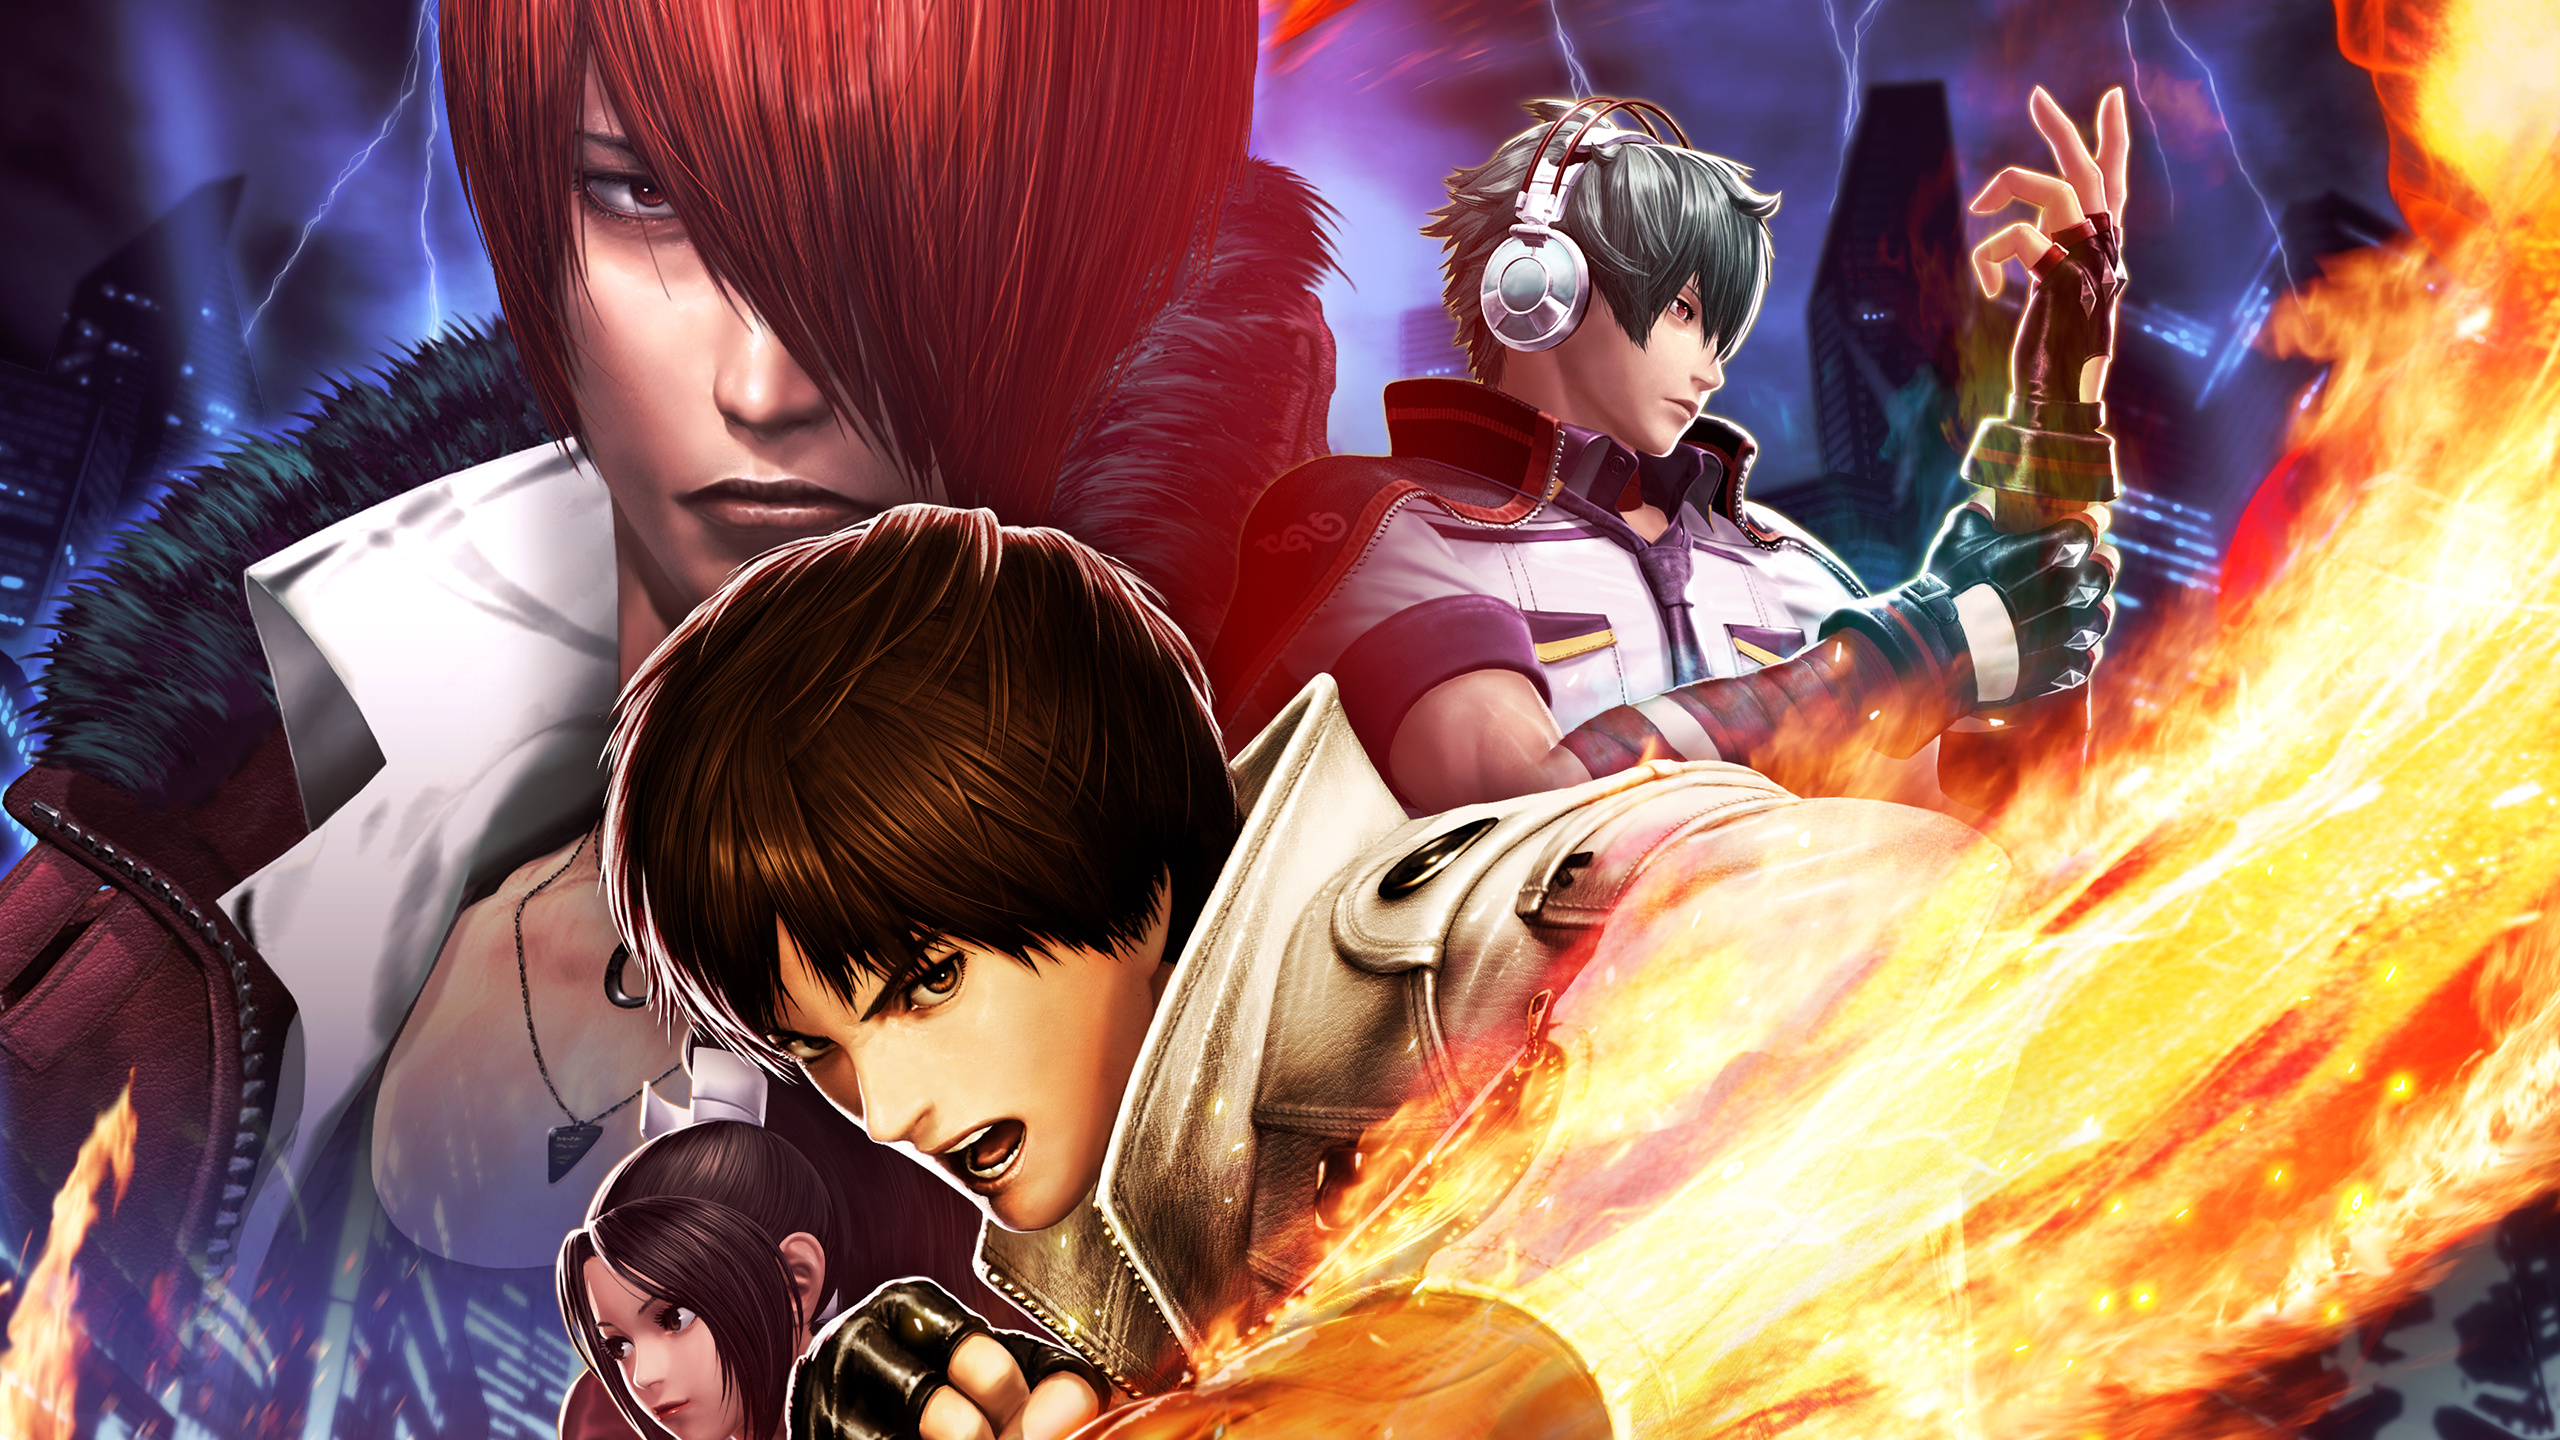 Iori Yagami, Gaming character, King of Fighters warrior, Video game art, 2560x1440 HD Desktop